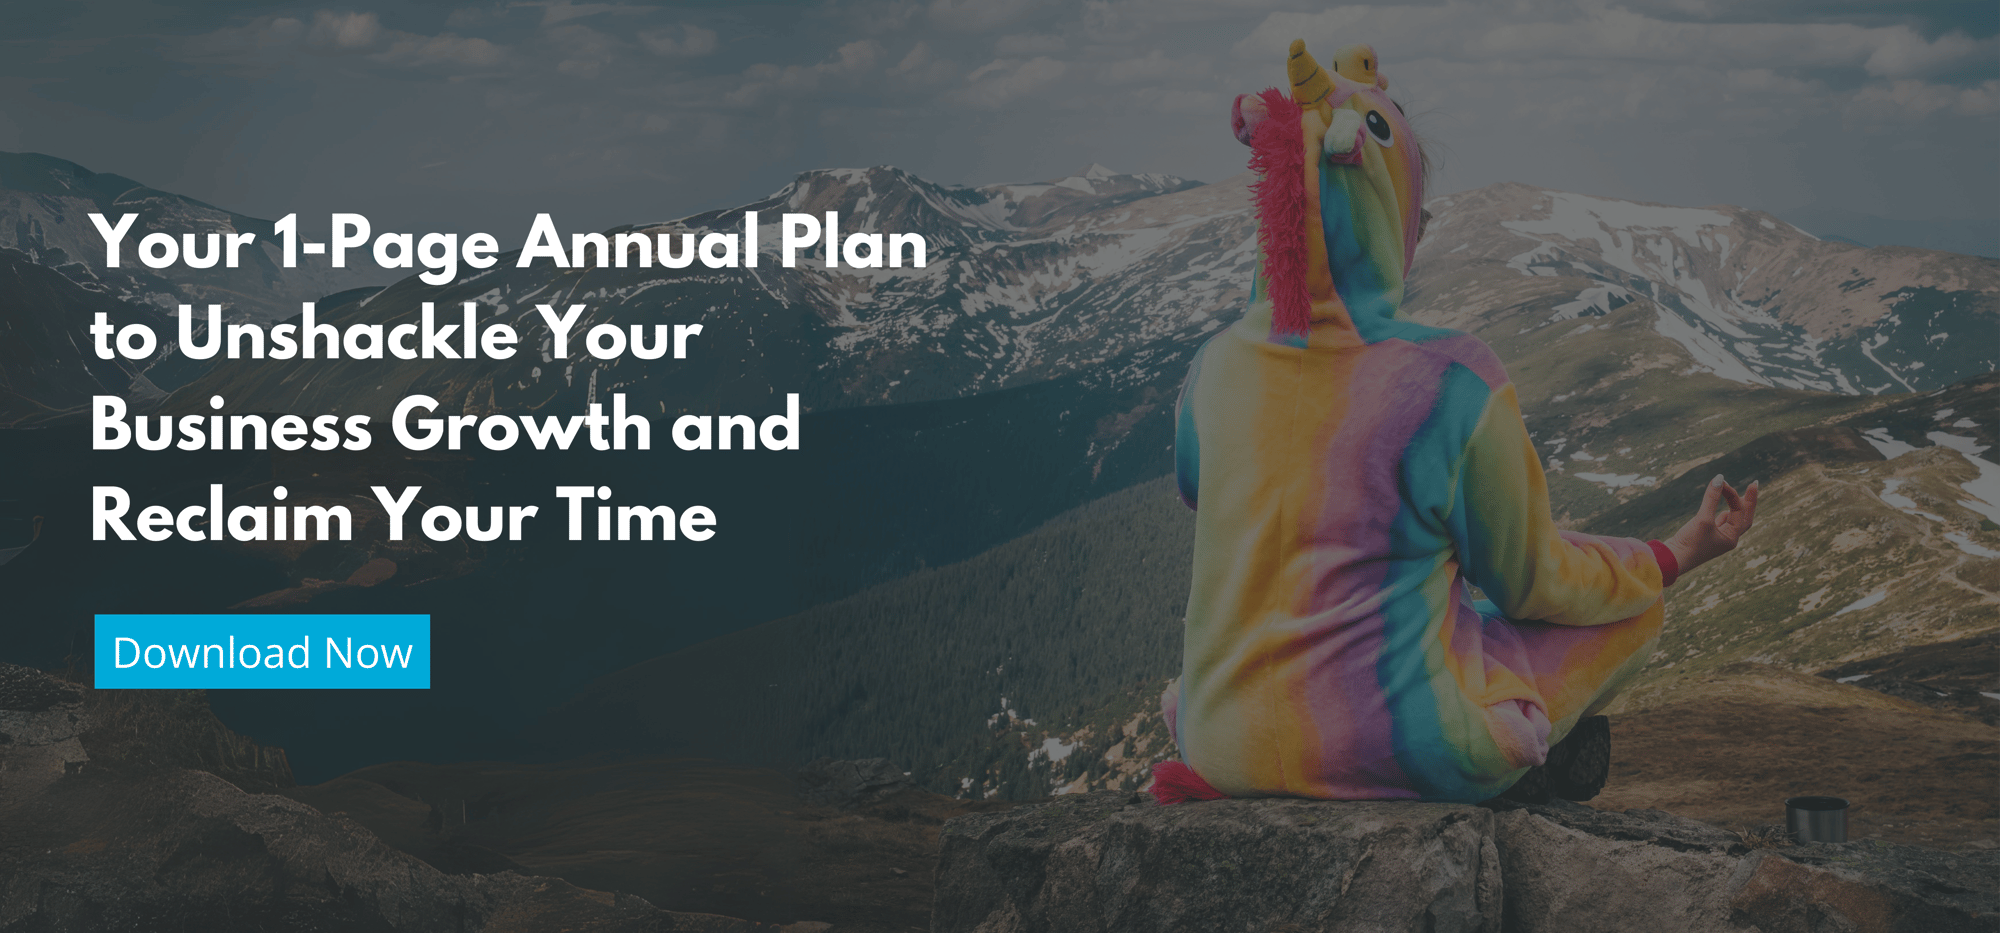 Your 1-Page Annual Plan to Unshackle Your Business Growth and Reclaiming Your Time (3)